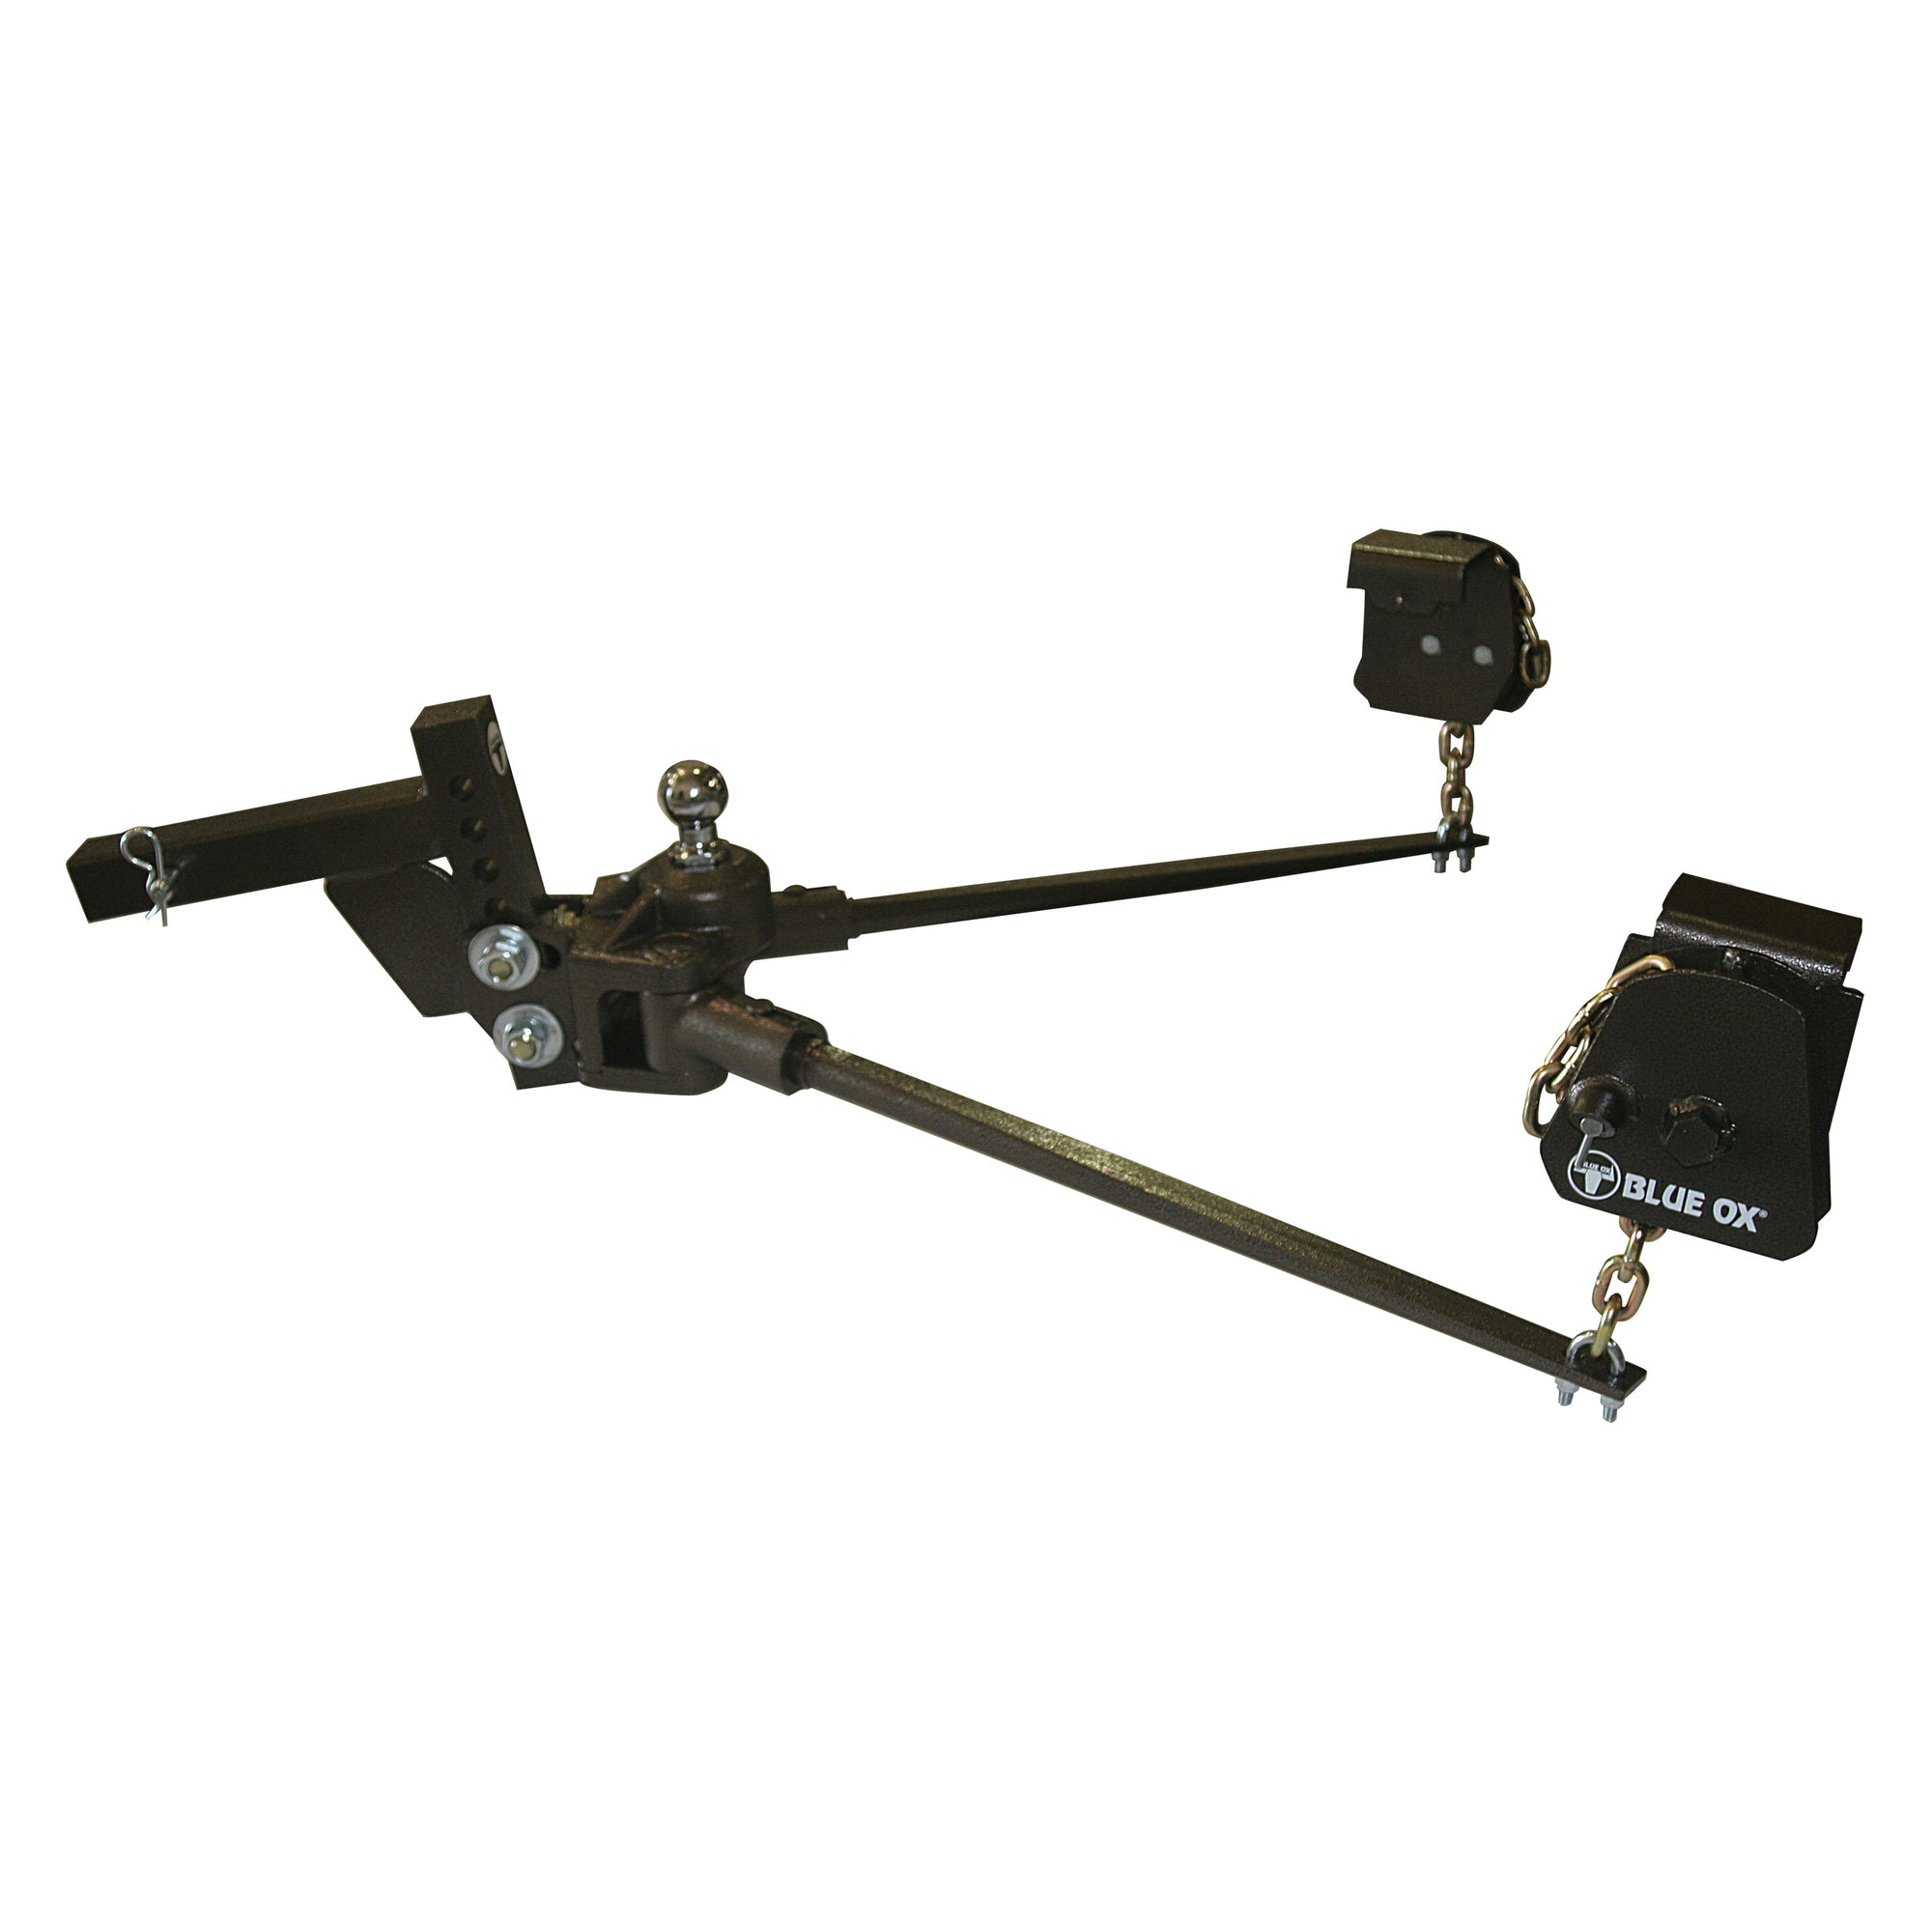 Blue Ox BXW1500 SwayPro Weight Distribution Hitch - 15,000 GTW/1,500 TW